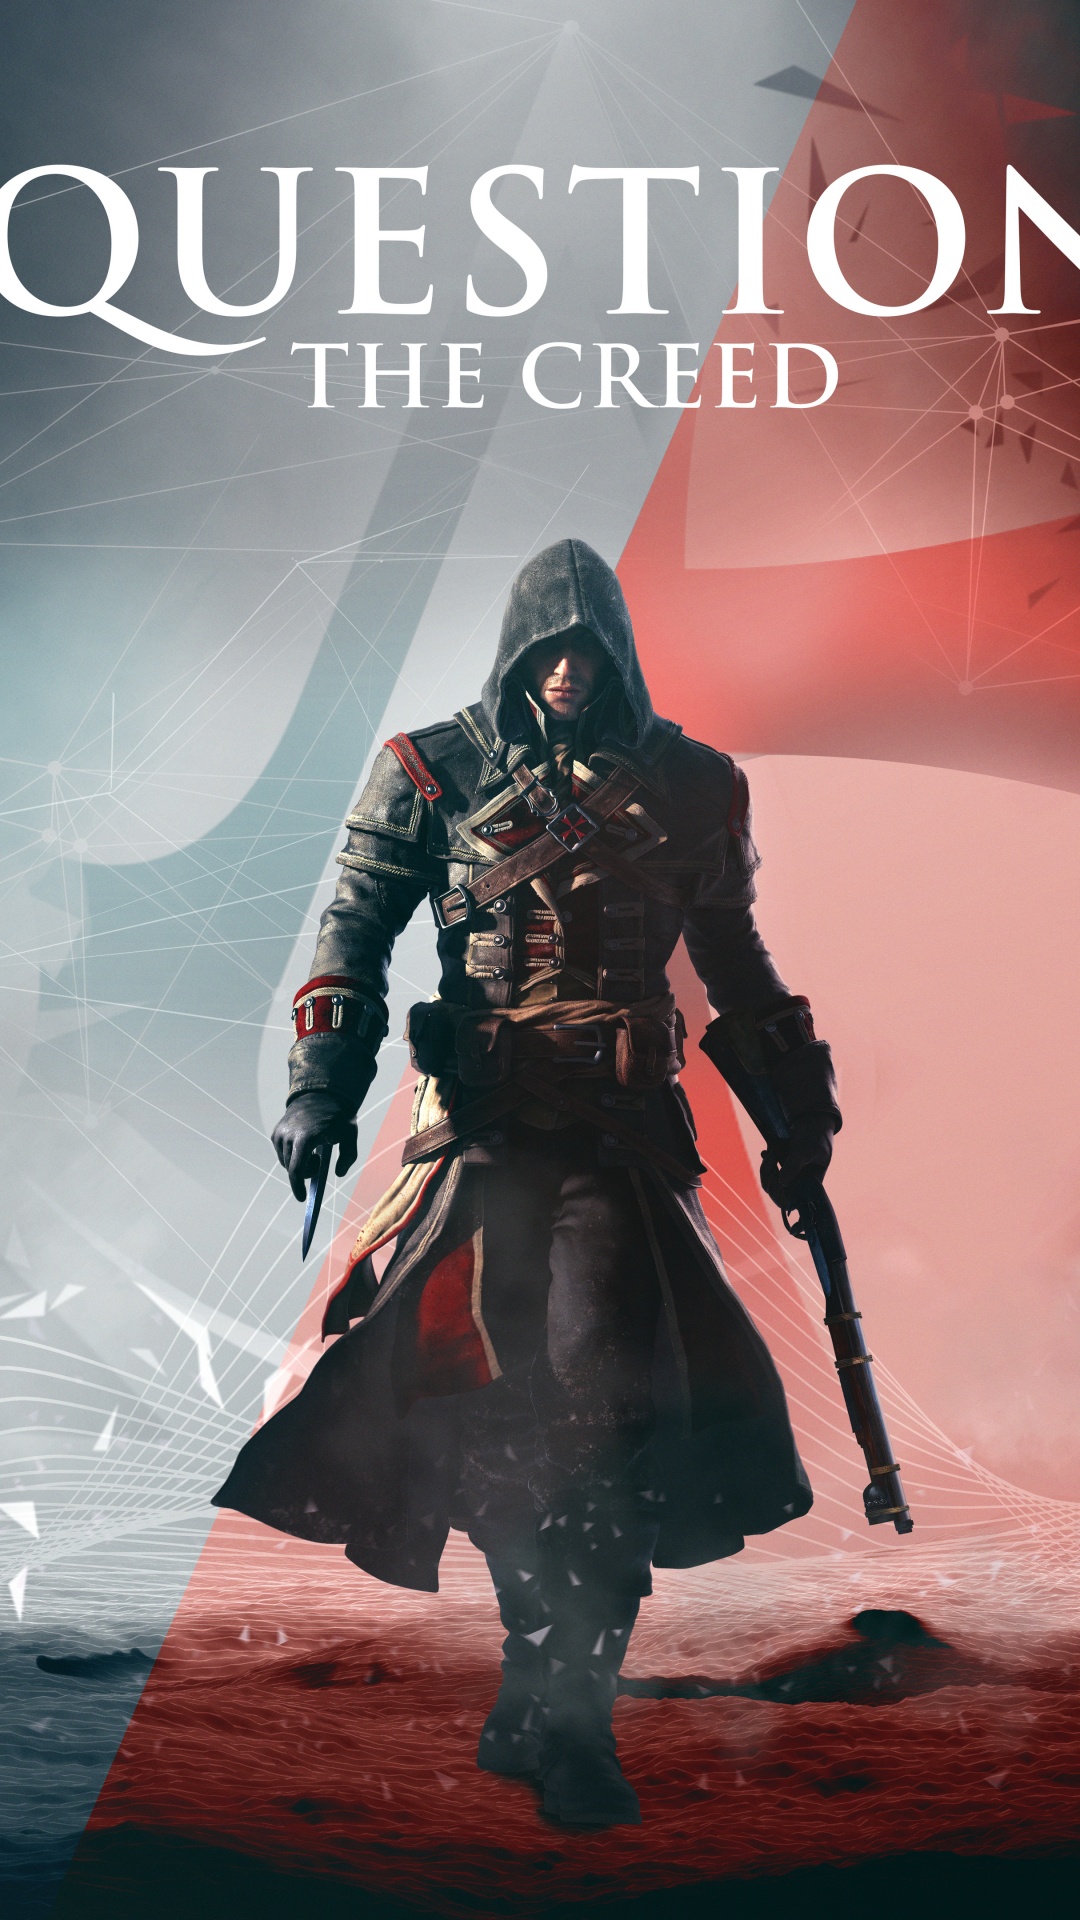 Assassins Creed Rogue, Assassins Creed Unity, Assassins Creed, Assassins Creed Brotherhood, Jeu D'aventure. Wallpaper in 1080x1920 Resolution